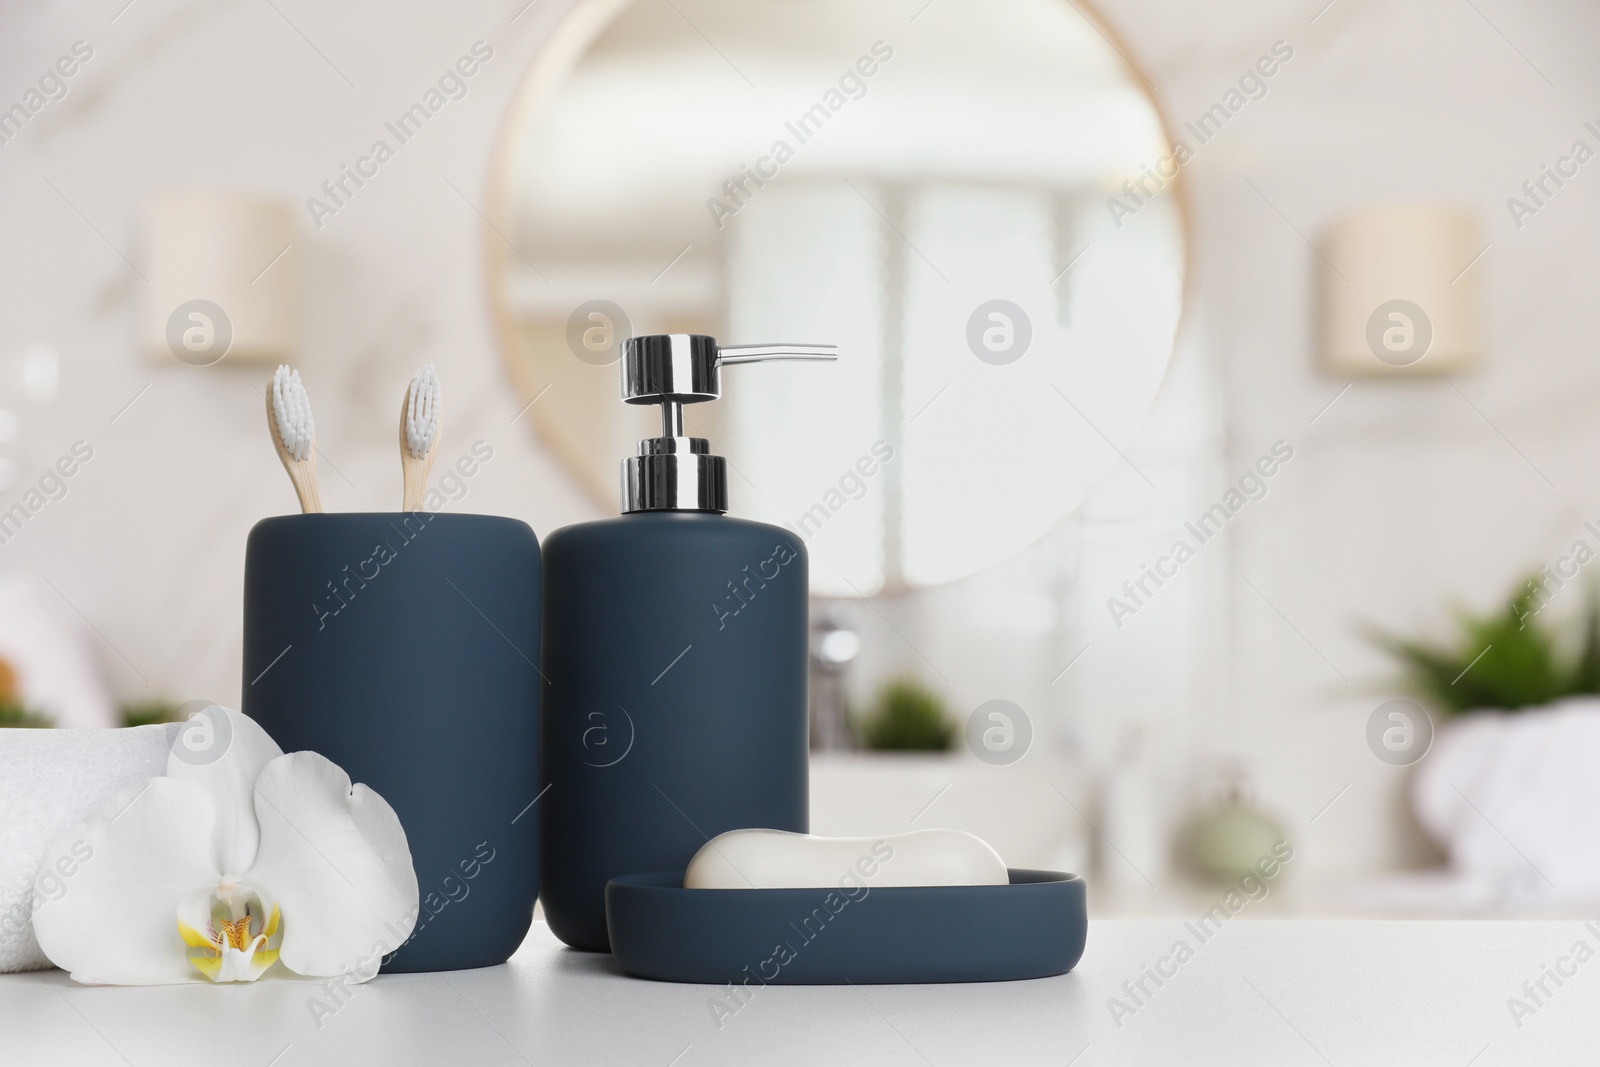 Image of Bath accessories. Different personal care products and flower on white table in bathroom, space for text